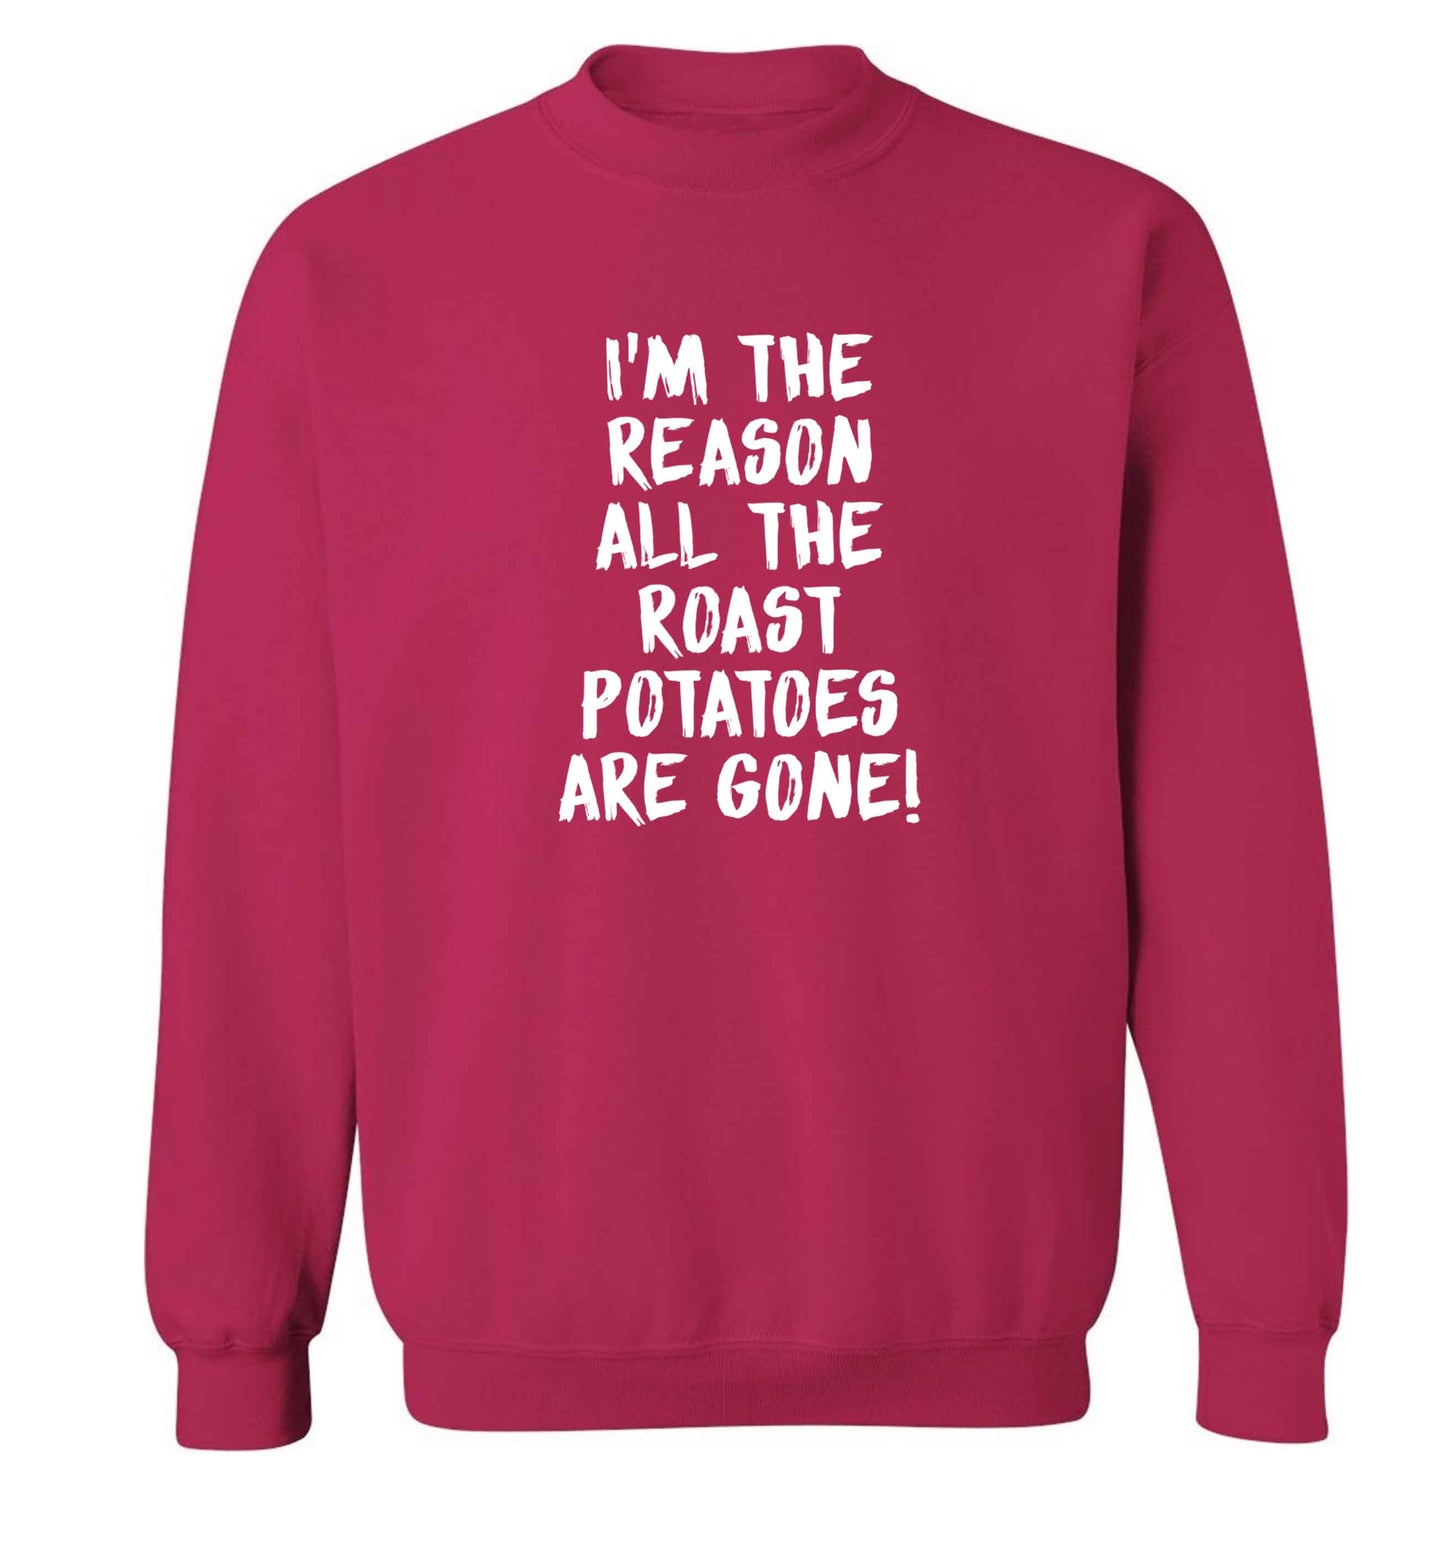 I'm the reason all the roast potatoes are gone adult's unisex pink sweater 2XL